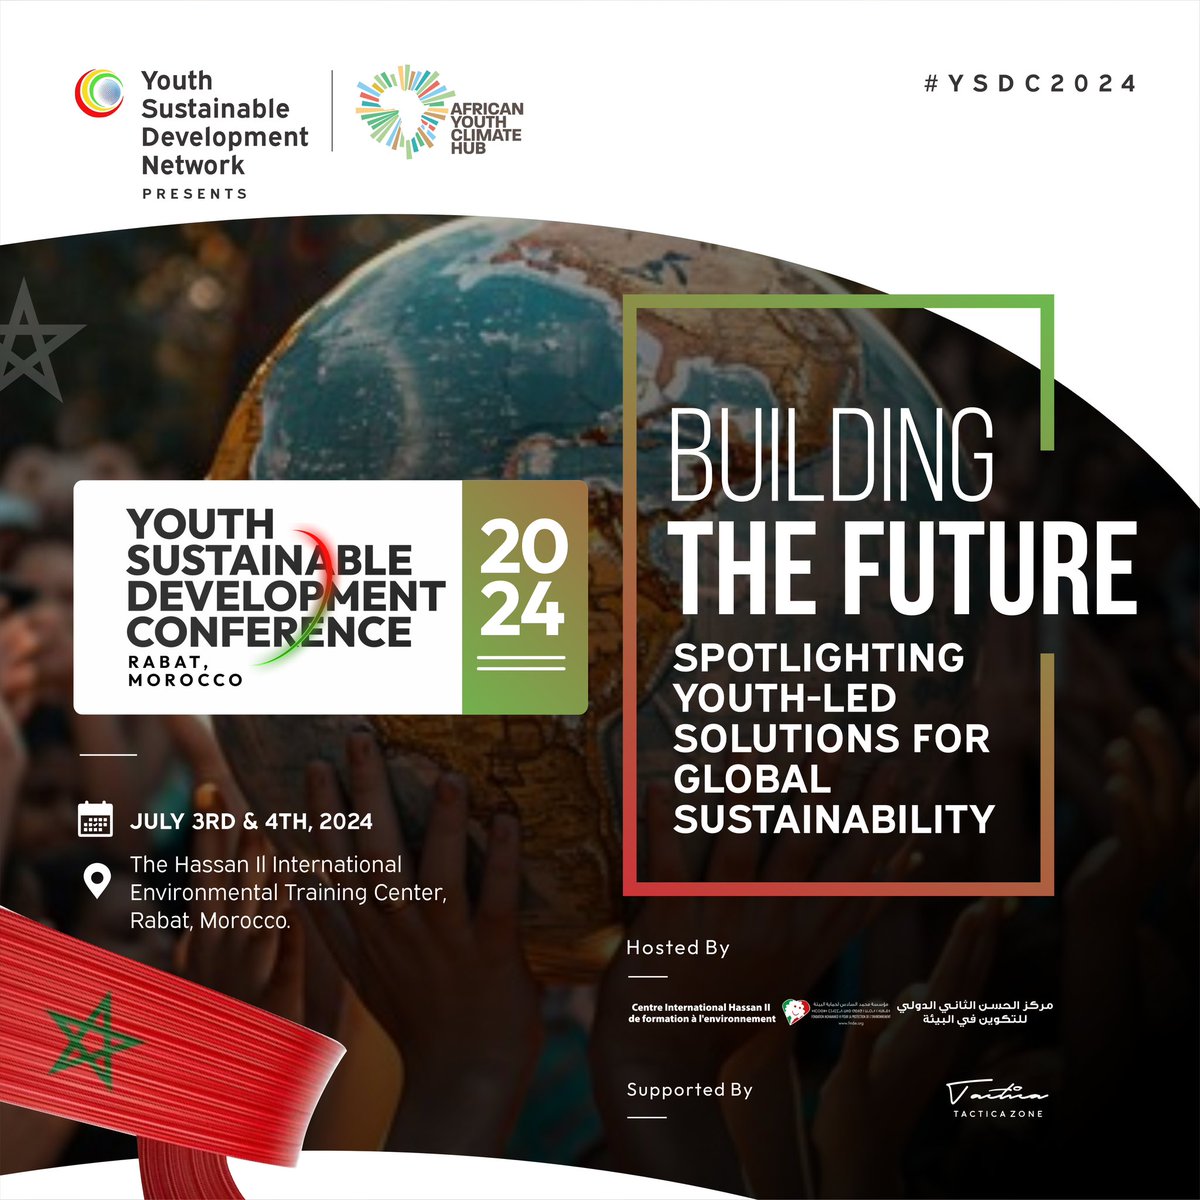 Mark your calendars 📆 The #YSDC2024 is coming to Rabat, Morocco 🇲🇦 This year, we will be shining light on innovative, cross-disciplinary dialogues and youth-led solutions, shaping a sustainable future in Africa and across the globe. 🔗ysdn.org/events/youth-s…